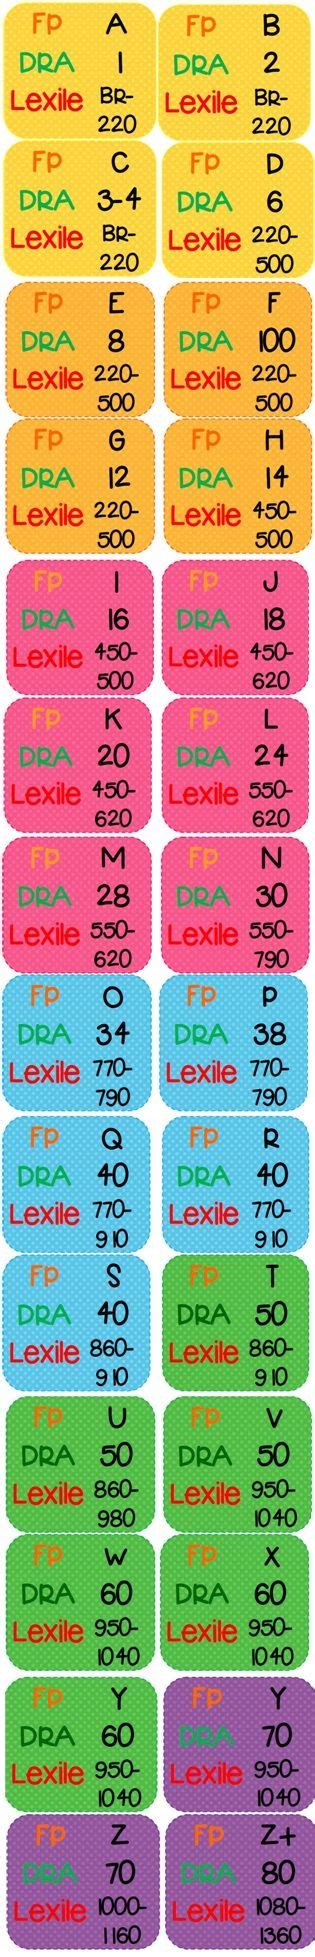 Polka Dot Design Reading Level Labels | Reading classroom, Reading levels, First grade reading